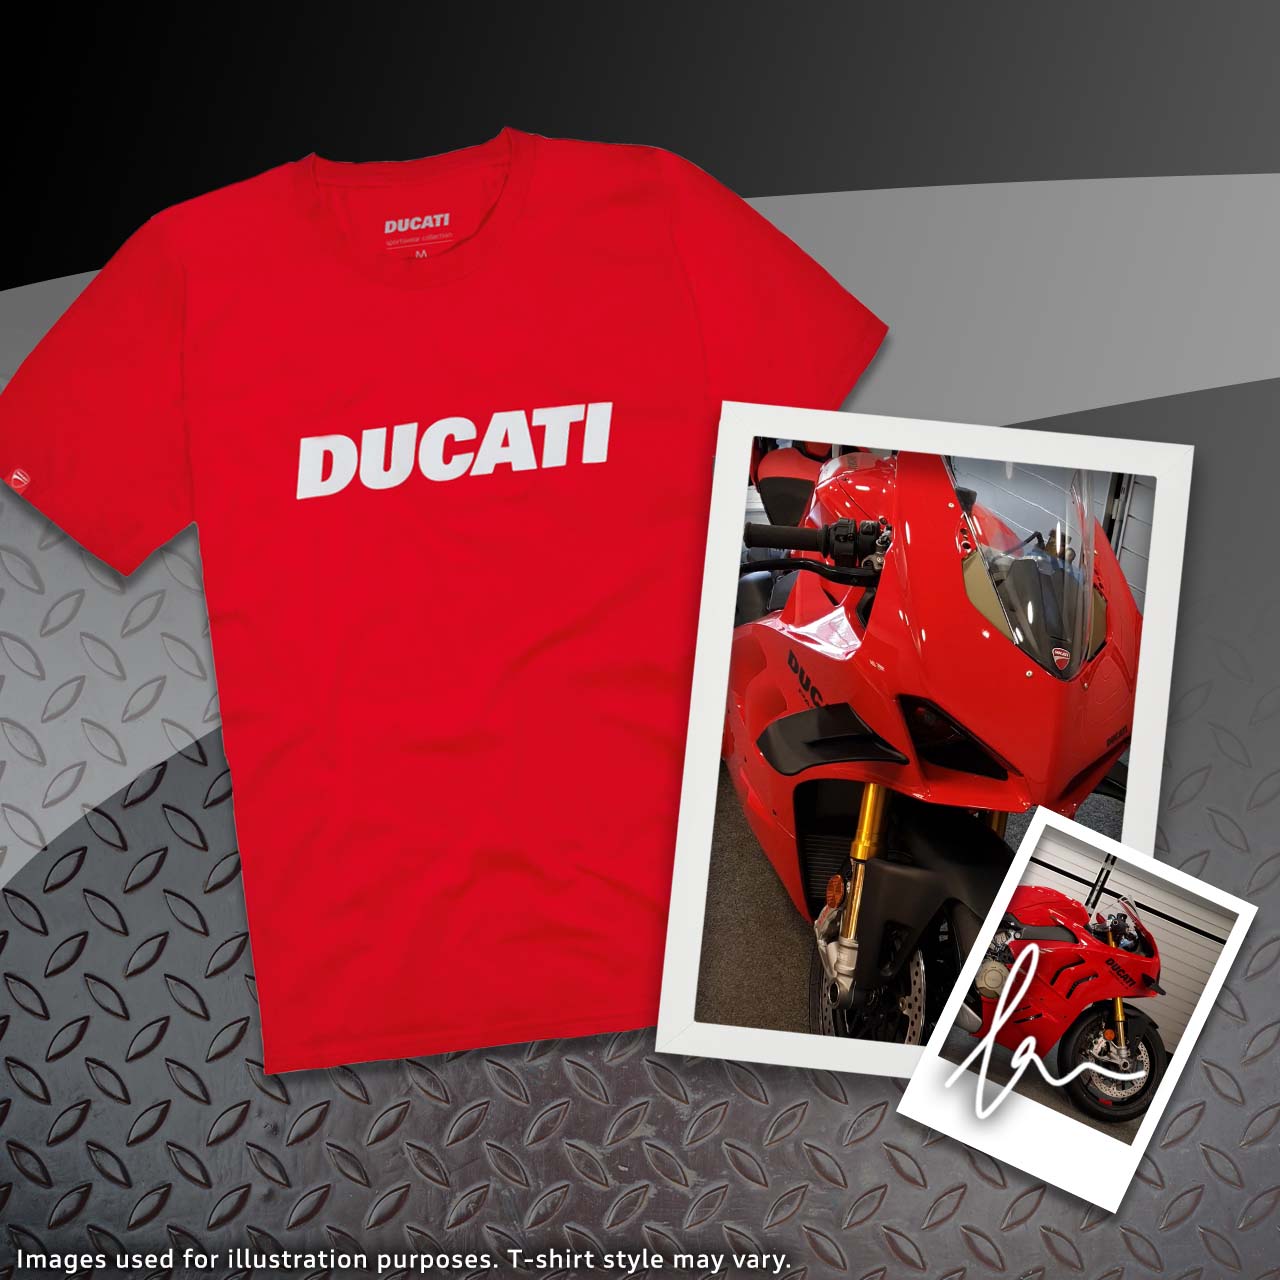 Join us at our Laguna Ducati Summer Celebration Event on Saturday 30th July and enter our Ducati bike competition